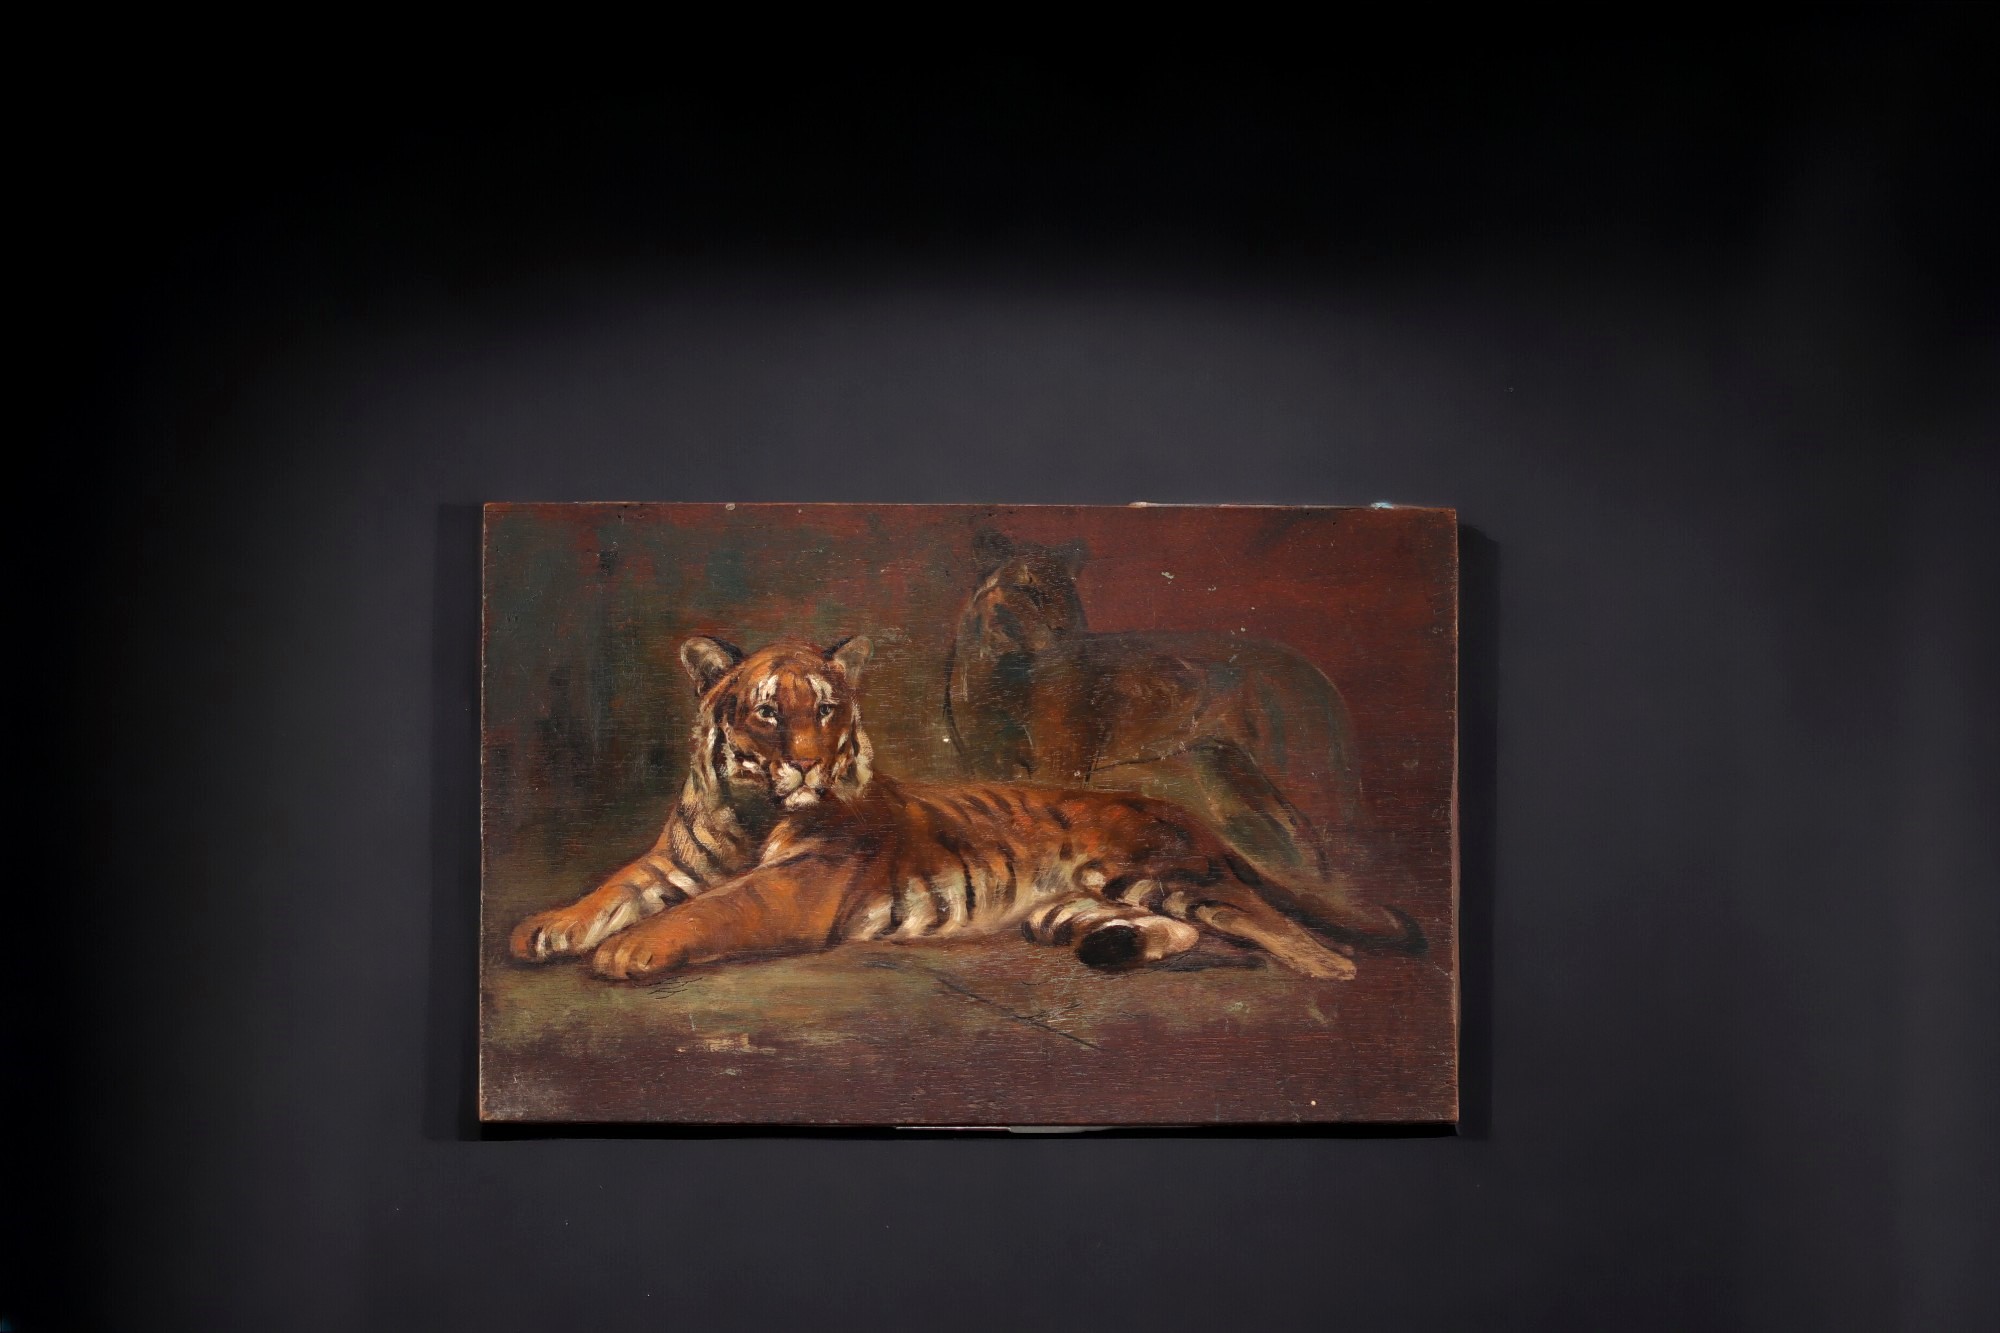 Henri VAN ZUYLEN (1860-1941) "Study of felines" and on the back "River in spring" Oil on panel, 1920